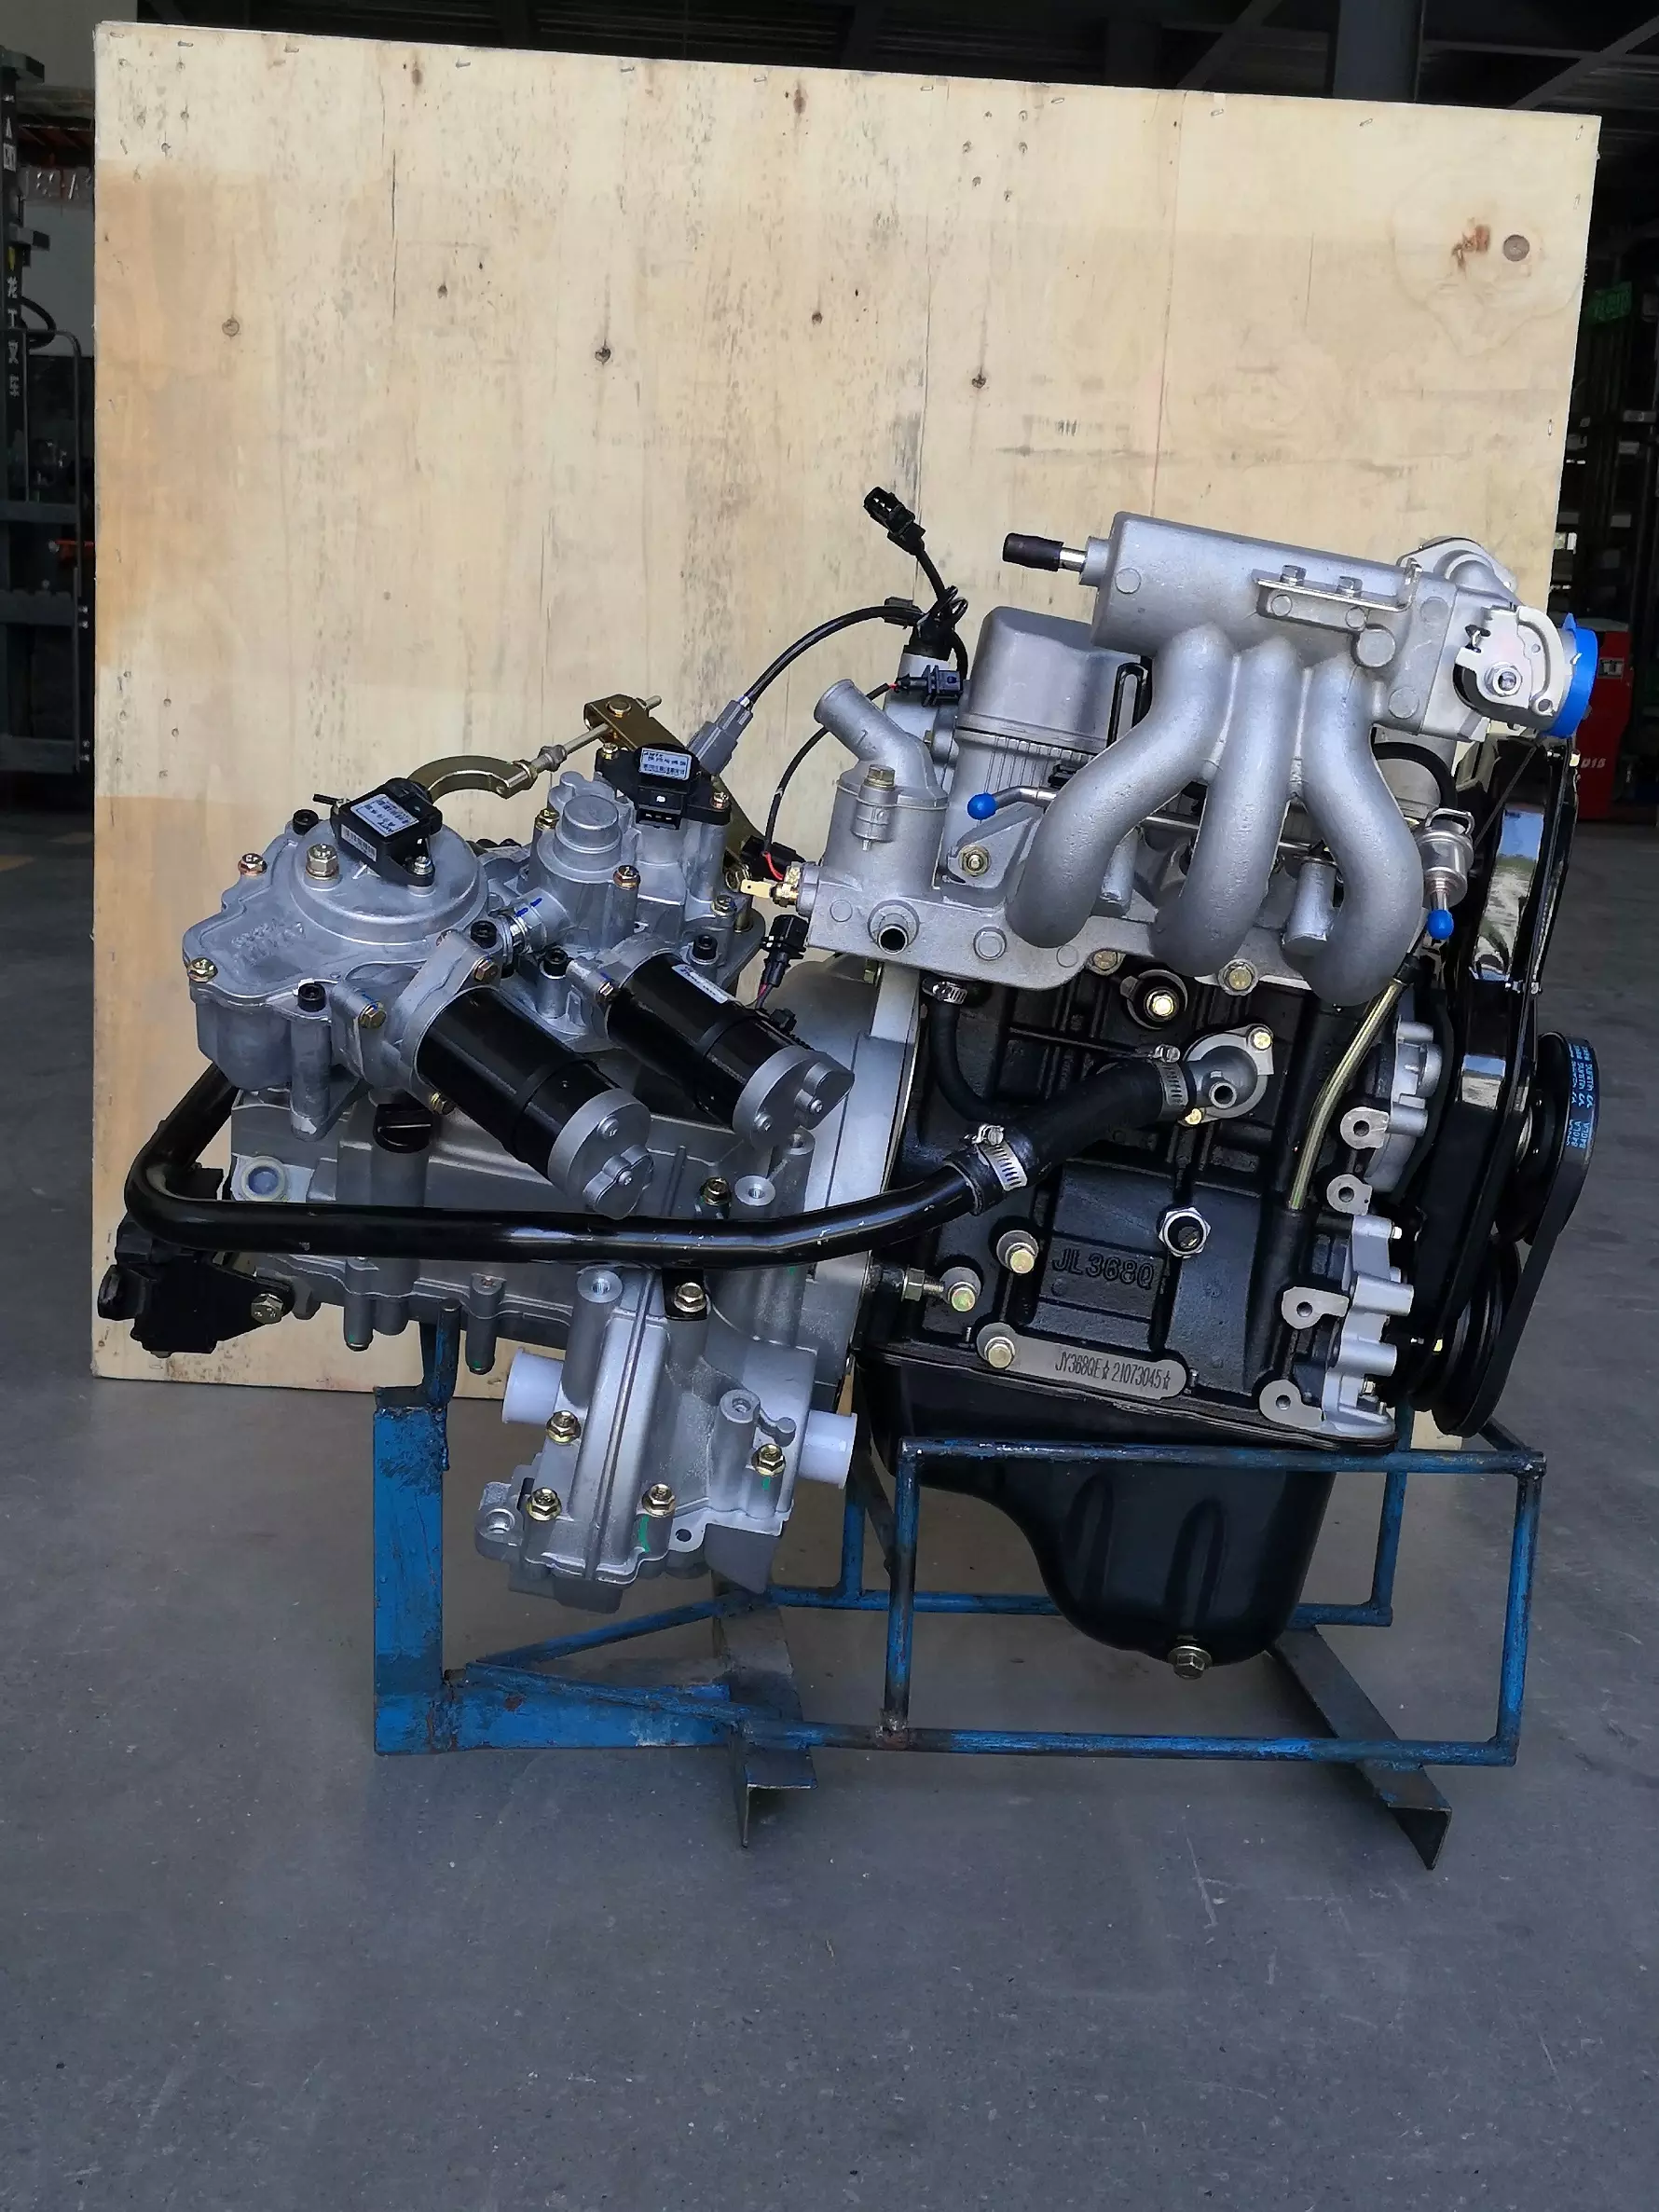 China DAYANG brand Motor cargo tricycle automobile Car Engine Brand New Auto Engine parts gasoline 800cc power